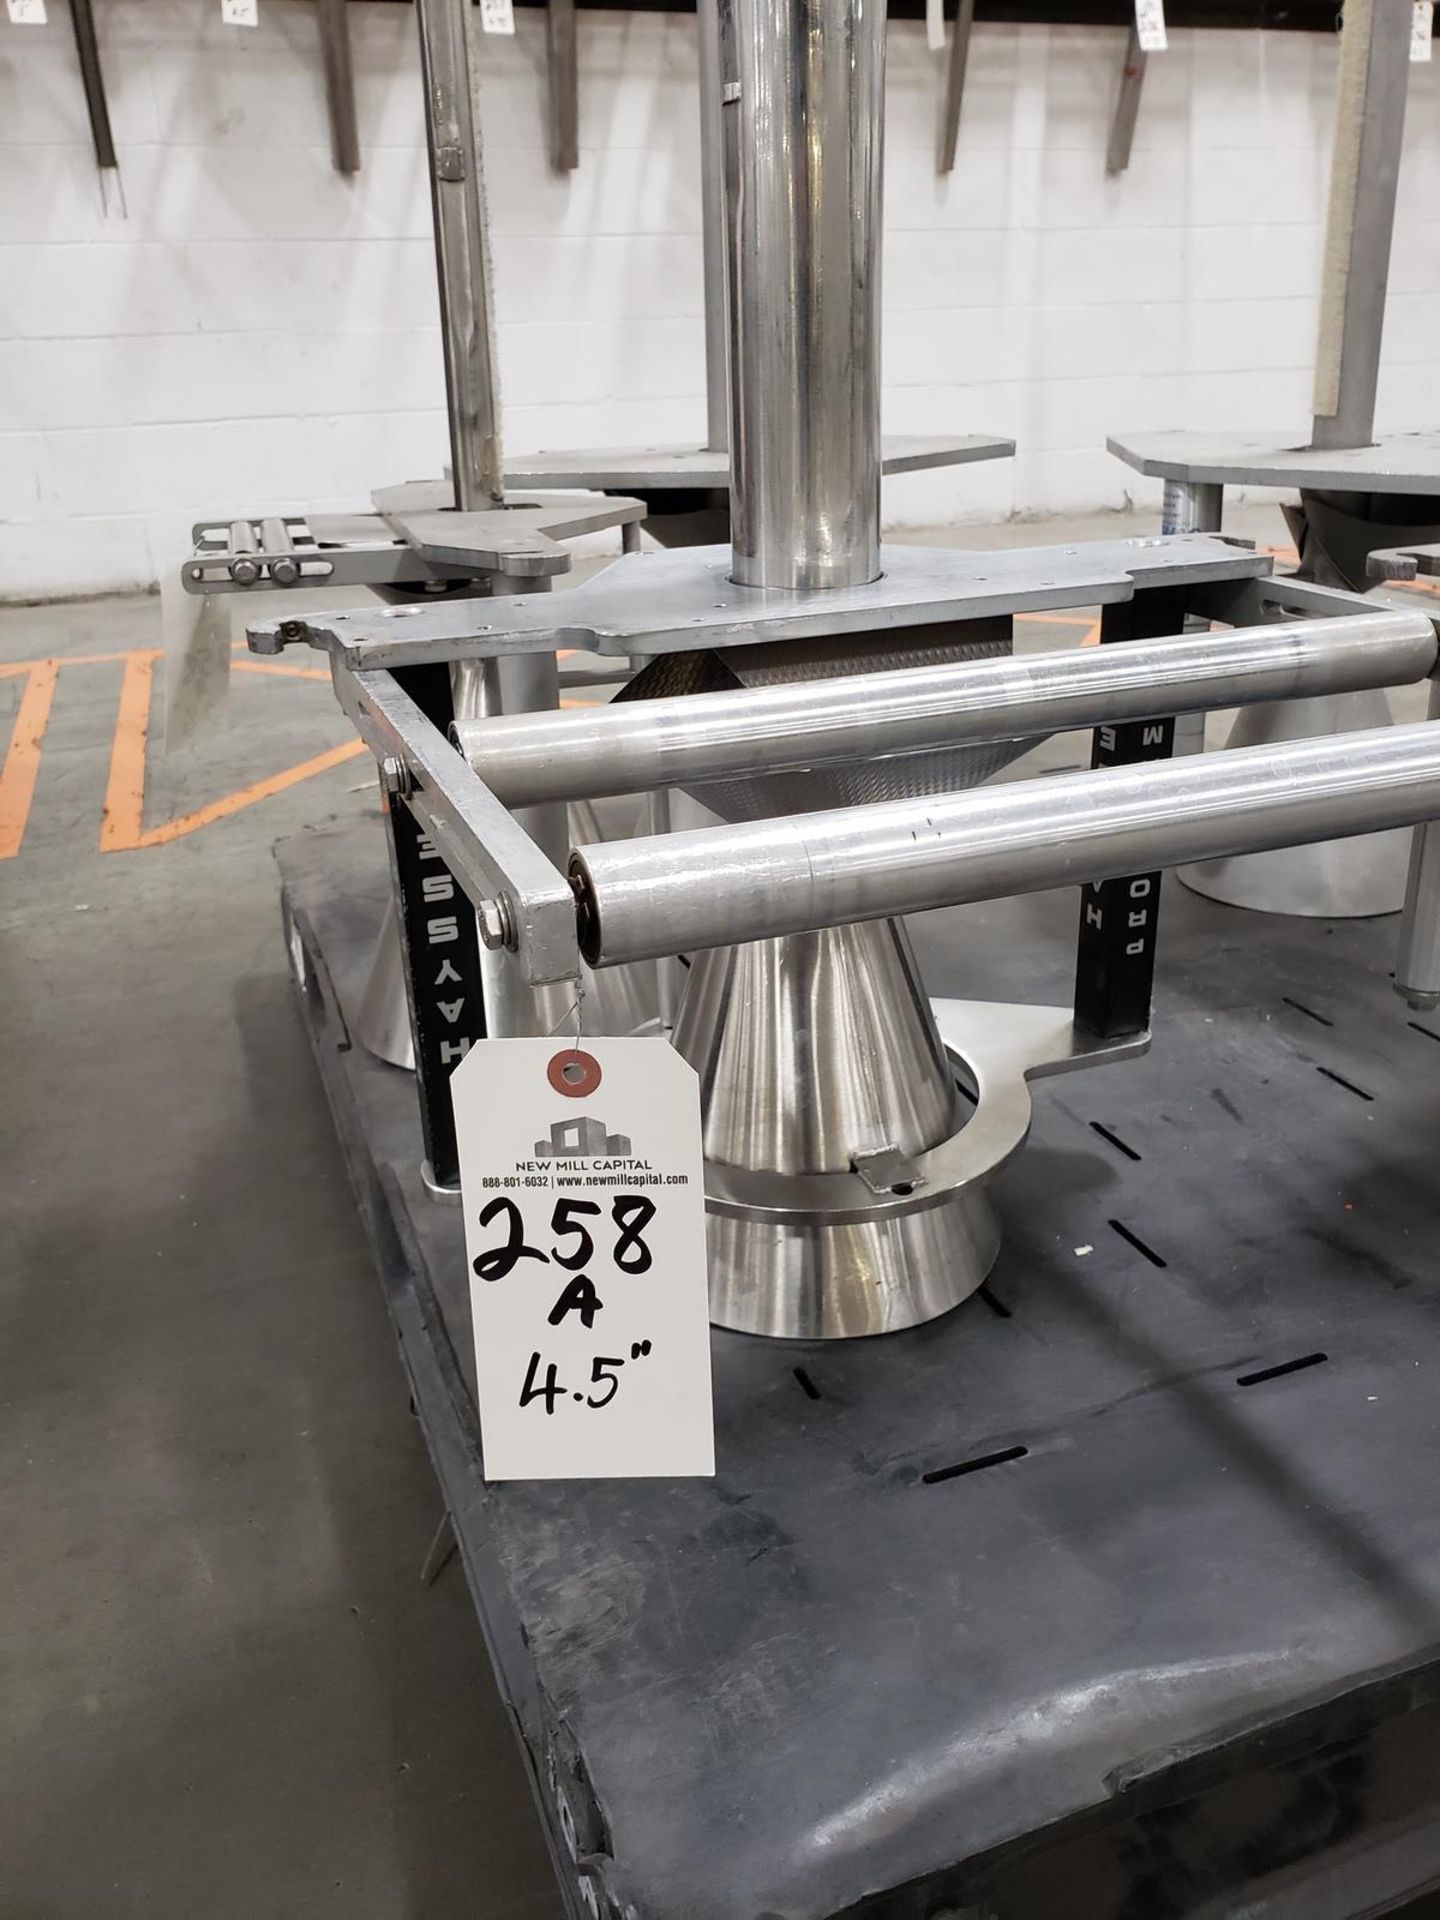 Lot of (5) Vertical Forming Tubes, Stamp Marked 4.5", 3.75", 3", 3" & 2 1/2" | Rig Fee: $100 - Image 2 of 6